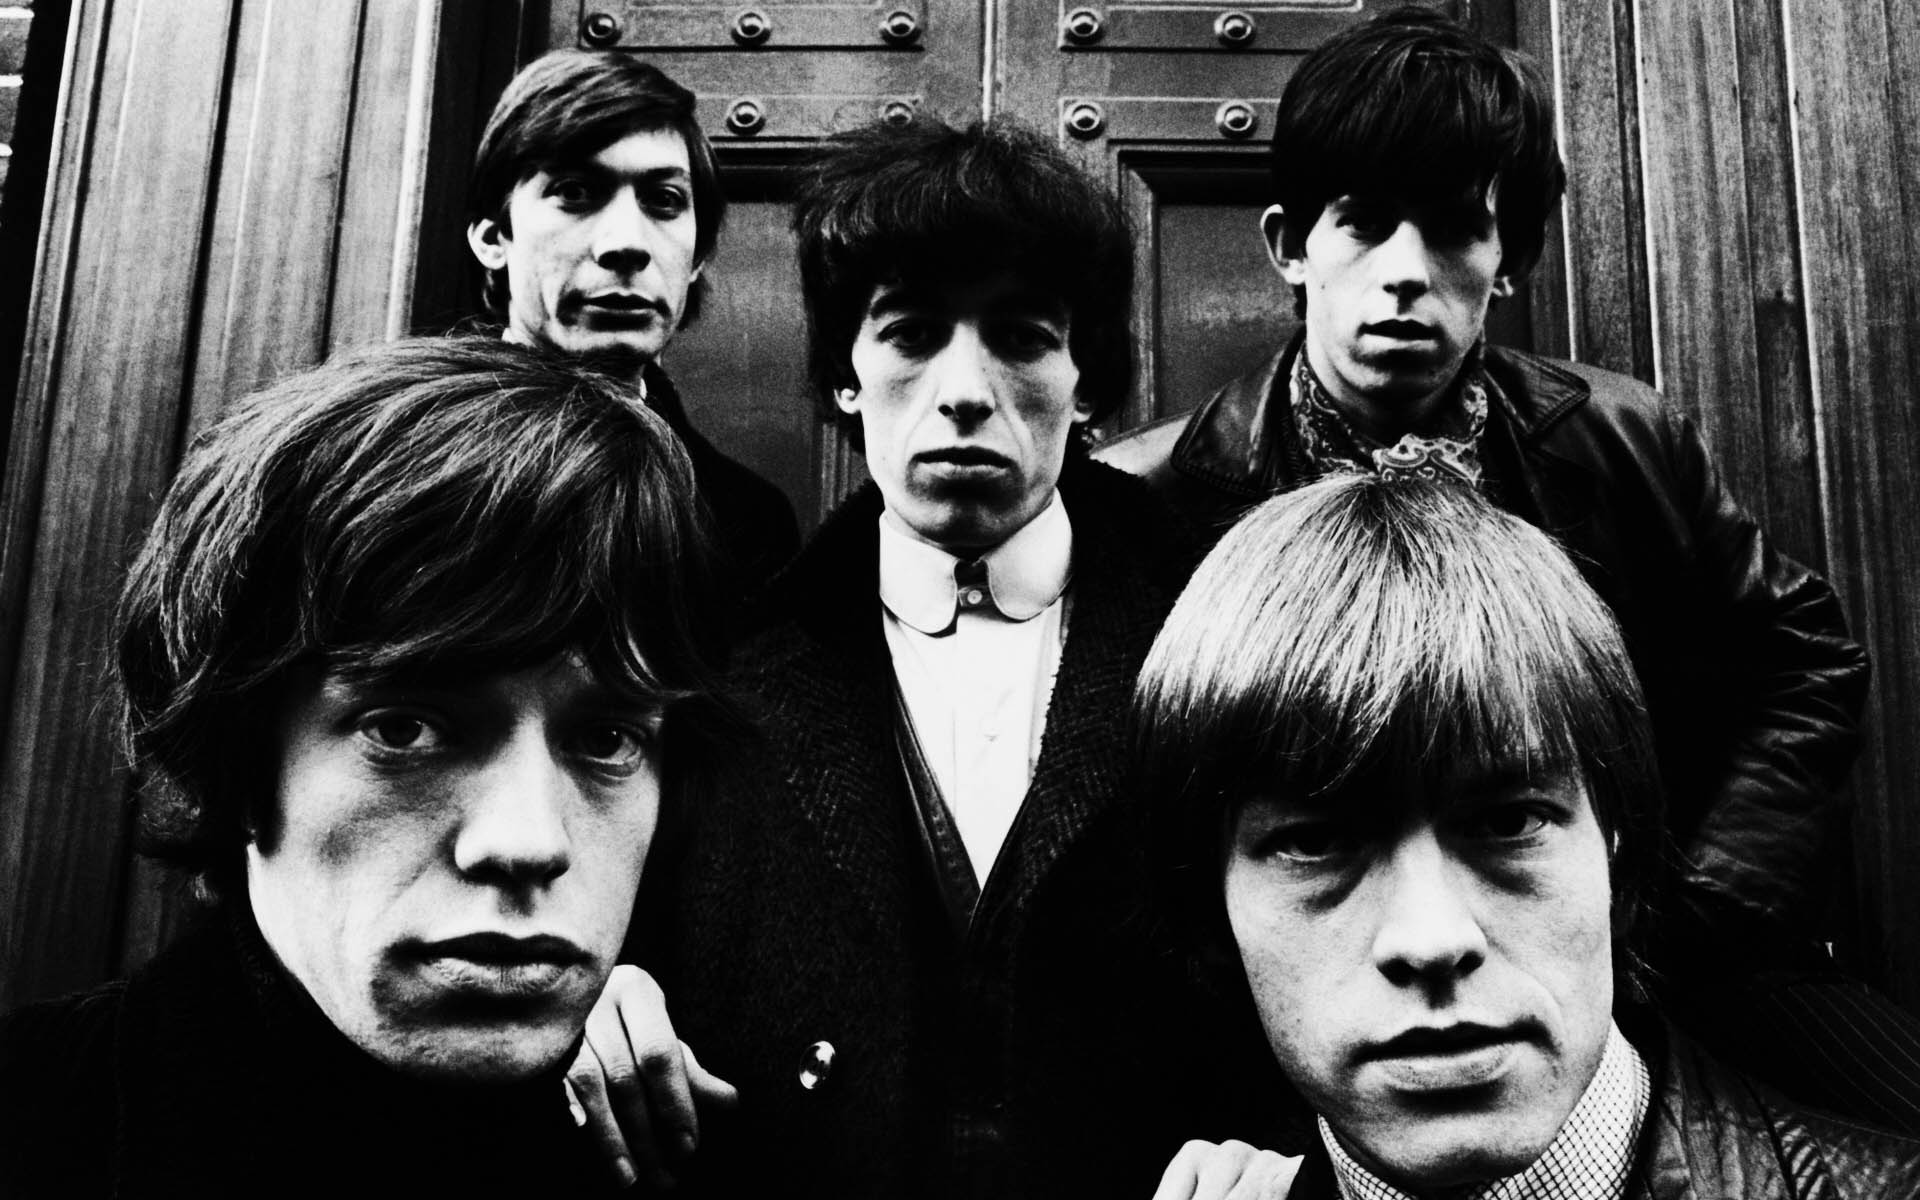 the, Rolling, Stones, Bw, Black, White, Faces, Bands, Group, Retro, Rock, Hard Wallpaper